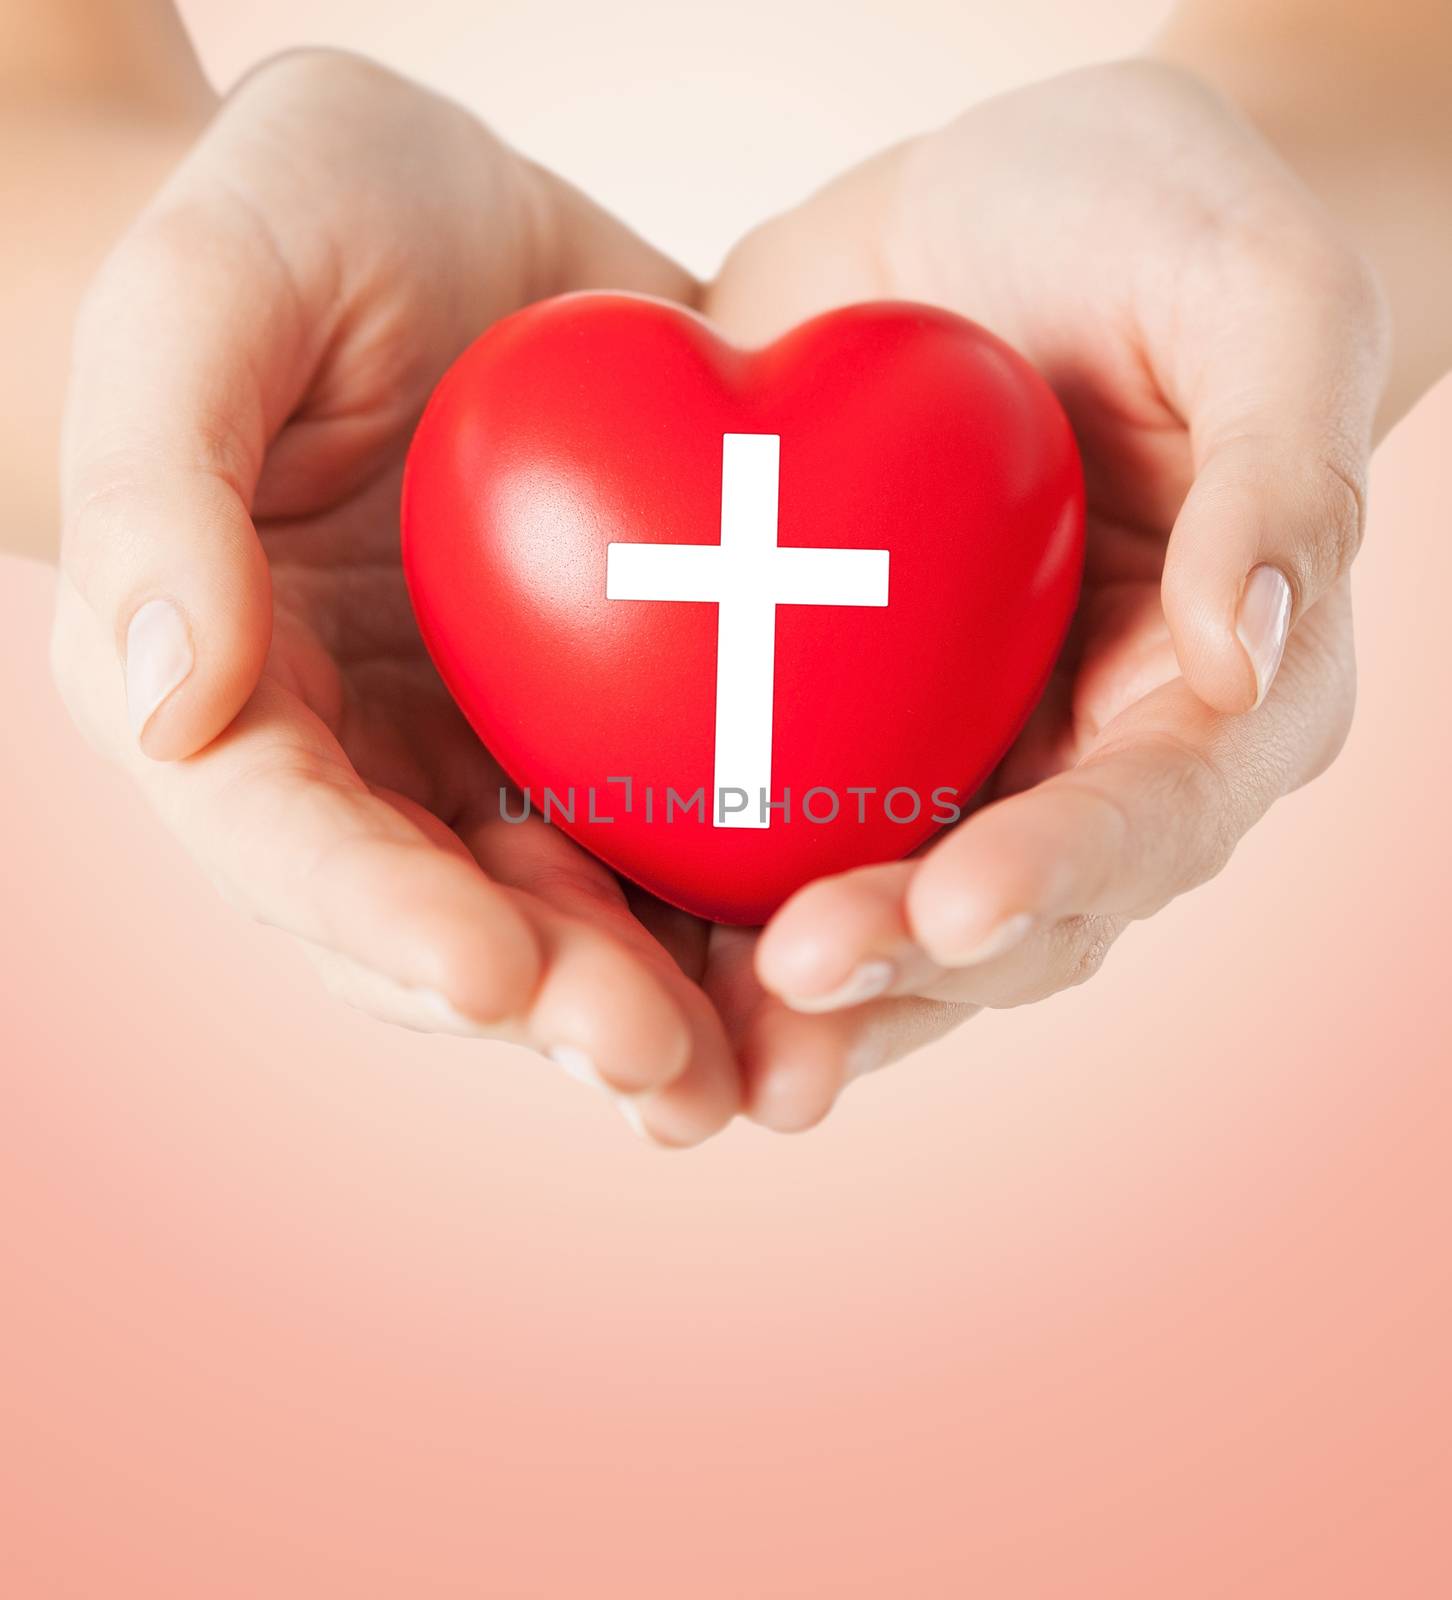 close up of hands holding heart with cross symbol by dolgachov